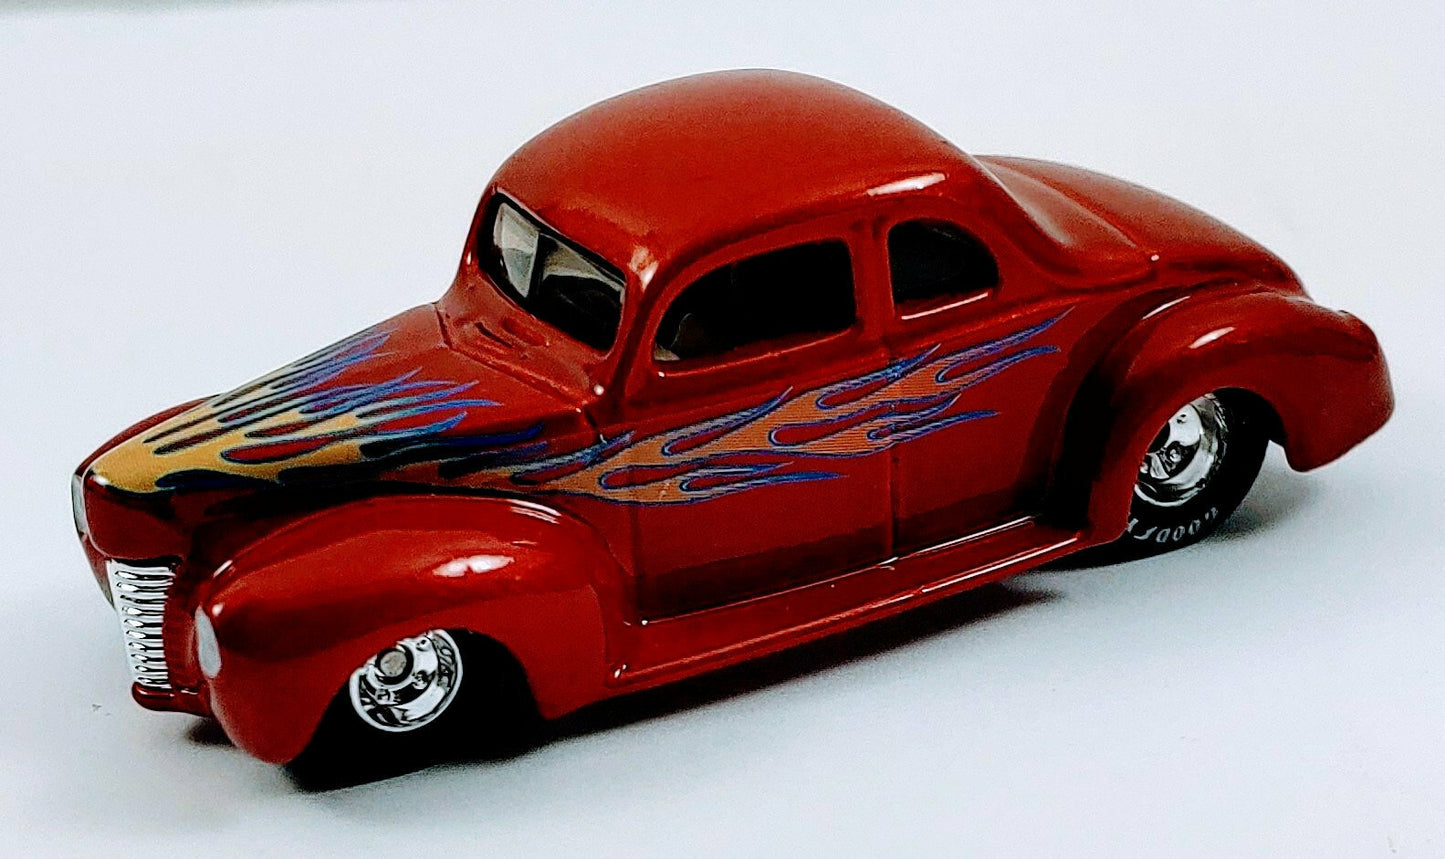 Hot Wheels 2021 - 35th Annual Collectors Convention / Make-A-Wish - '40 Ford Coupe